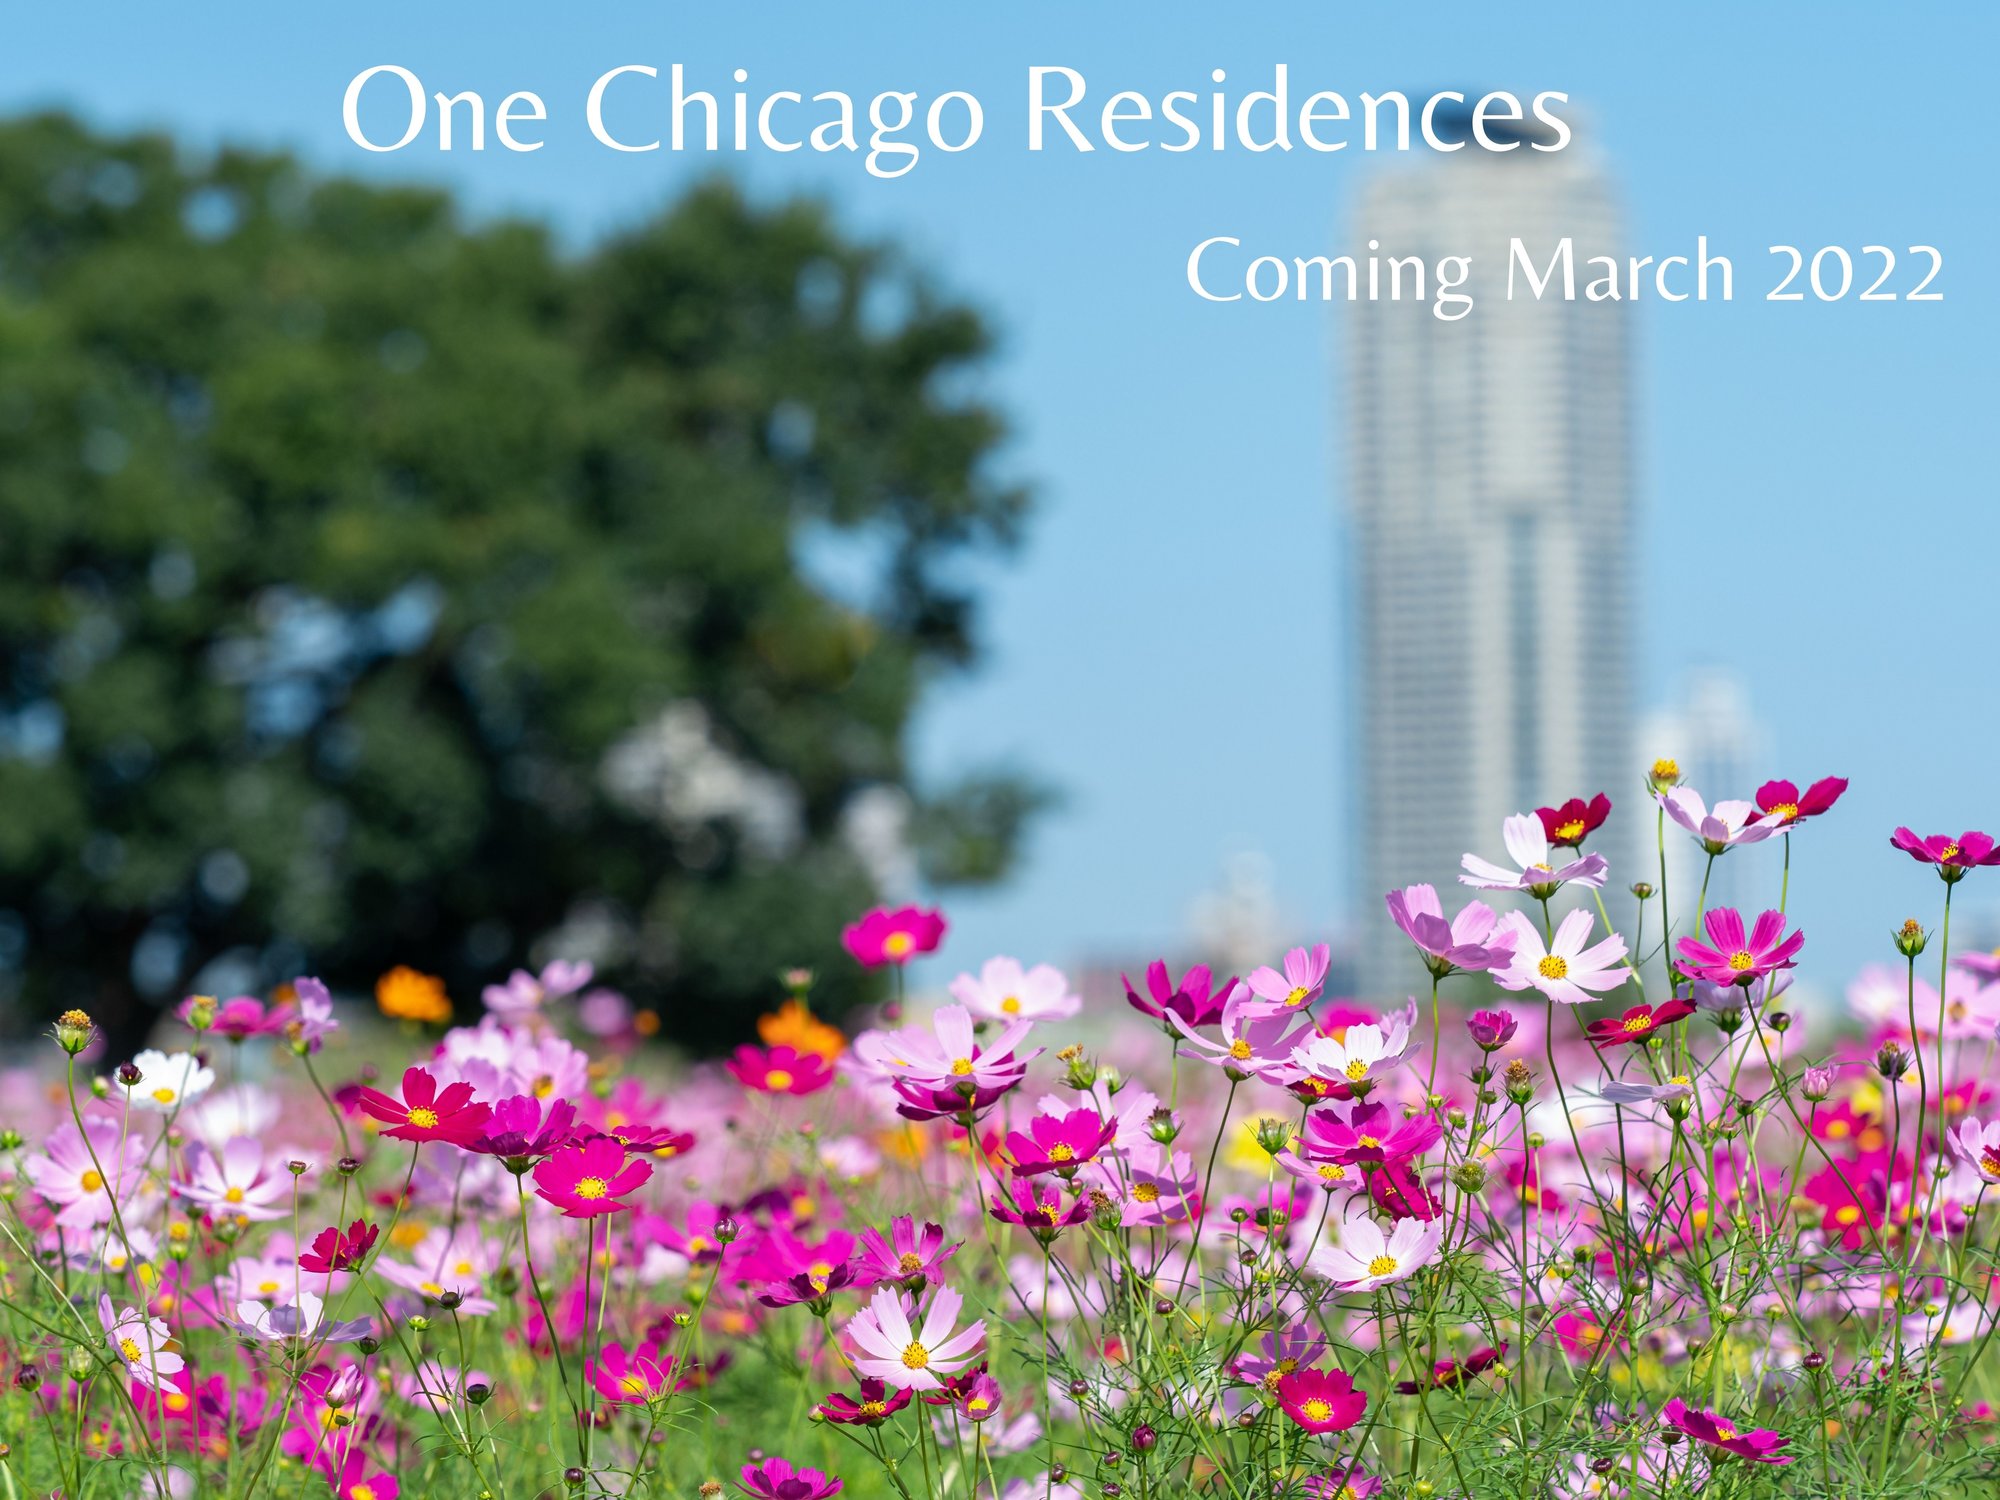 OneChicagoResidences